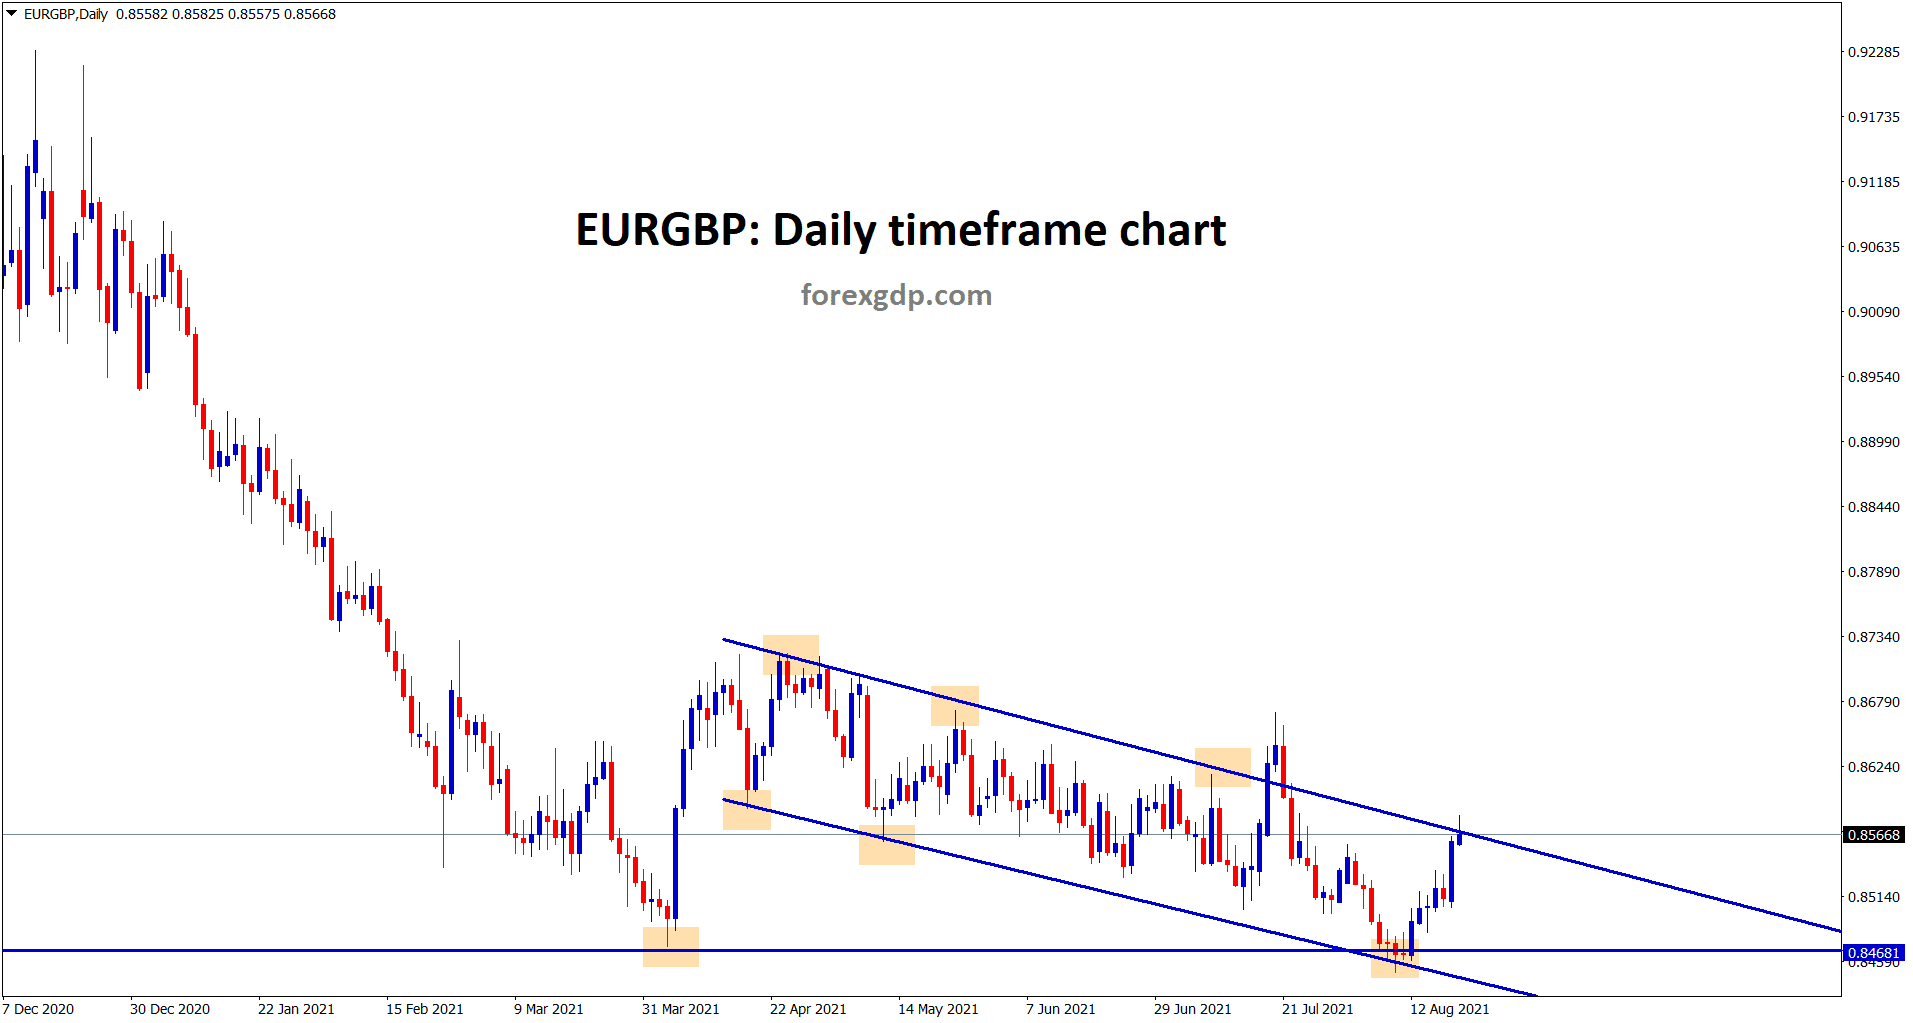 EURGBP hits the lower high of the descending channel wait for breakout or reversal